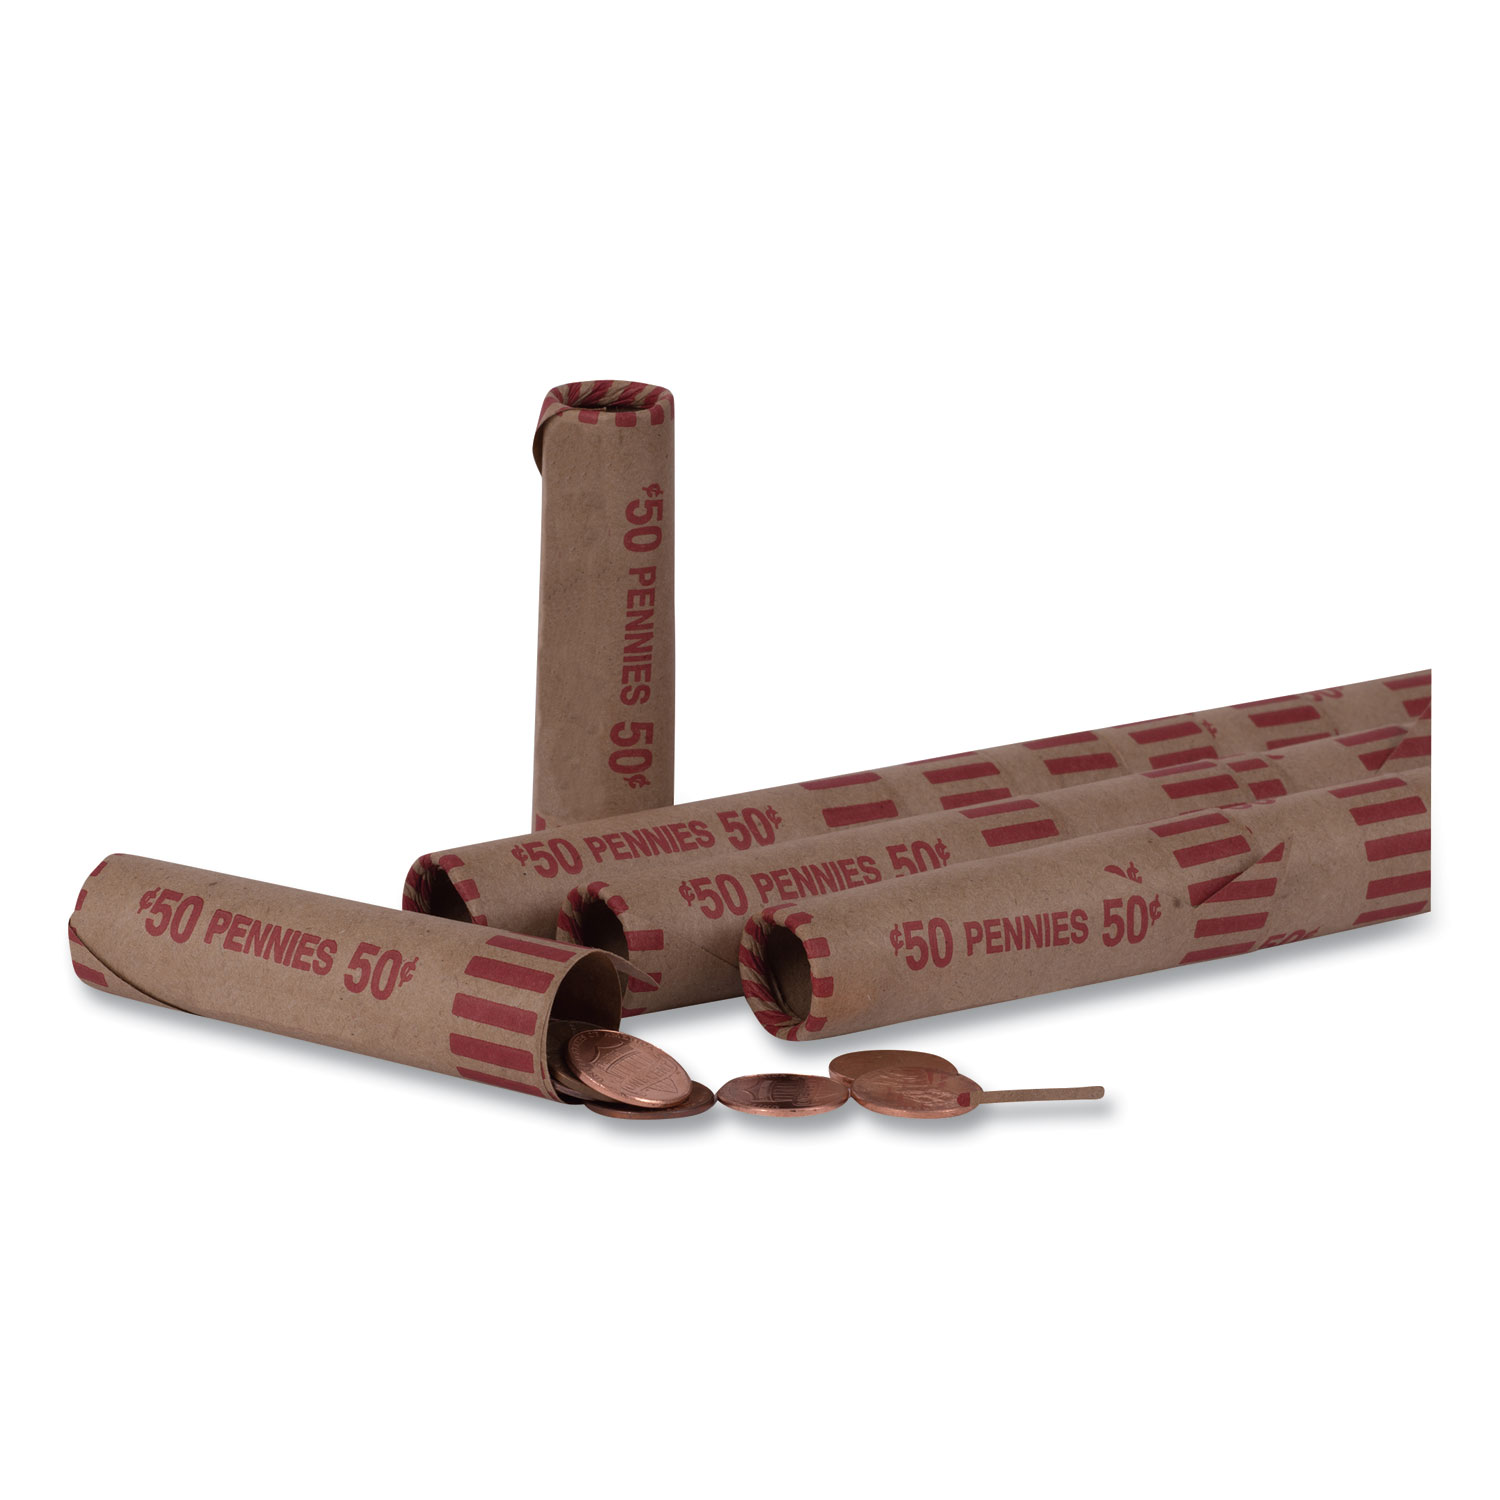 Preformed Tubular Coin Wrappers, Pennies, $.50, 1000 Wrappers/Box